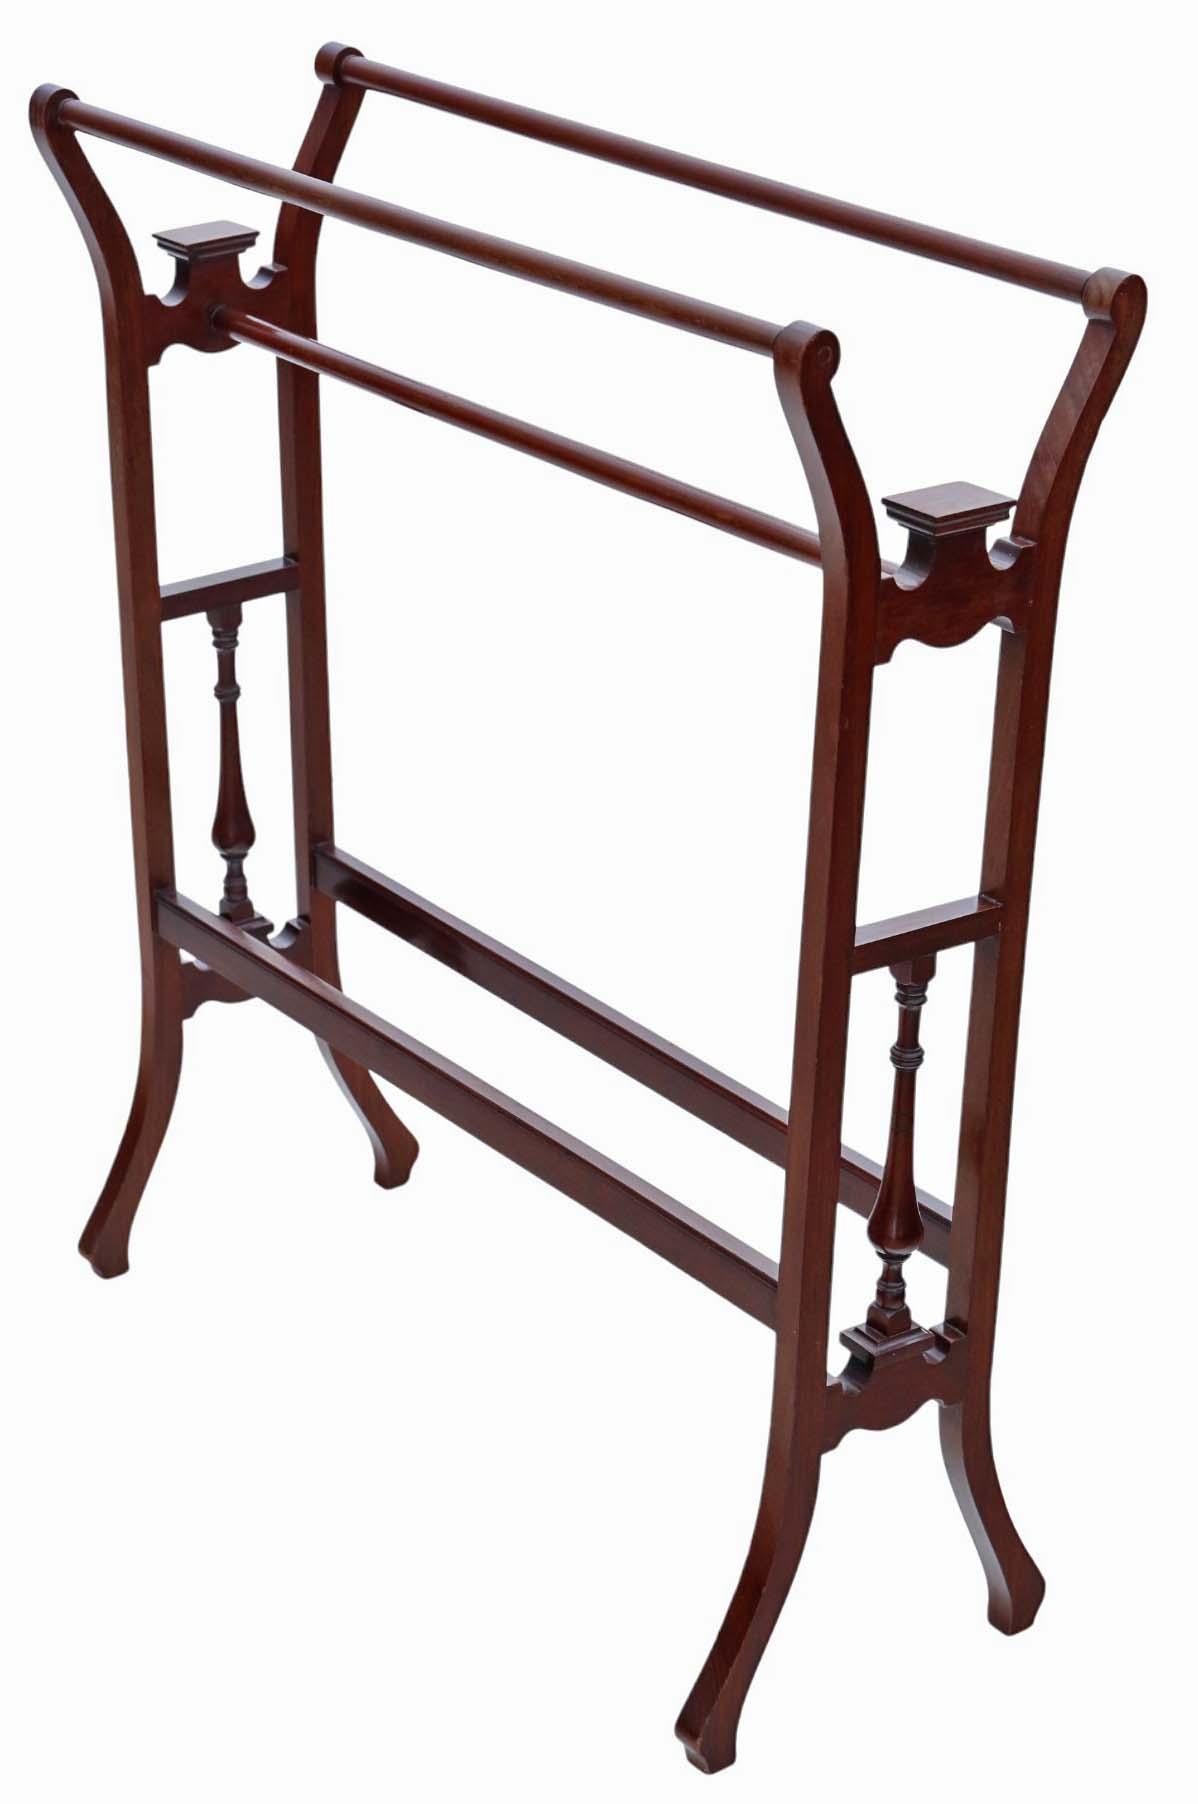 Antique Victorian Mahogany Towel Rail Stand - Quality Art Nouveau from circa 1900.

Solid construction with no loose joints or woodworm, promising longevity and stability.

This piece adds a touch of elegance to any space it occupies.

Overall